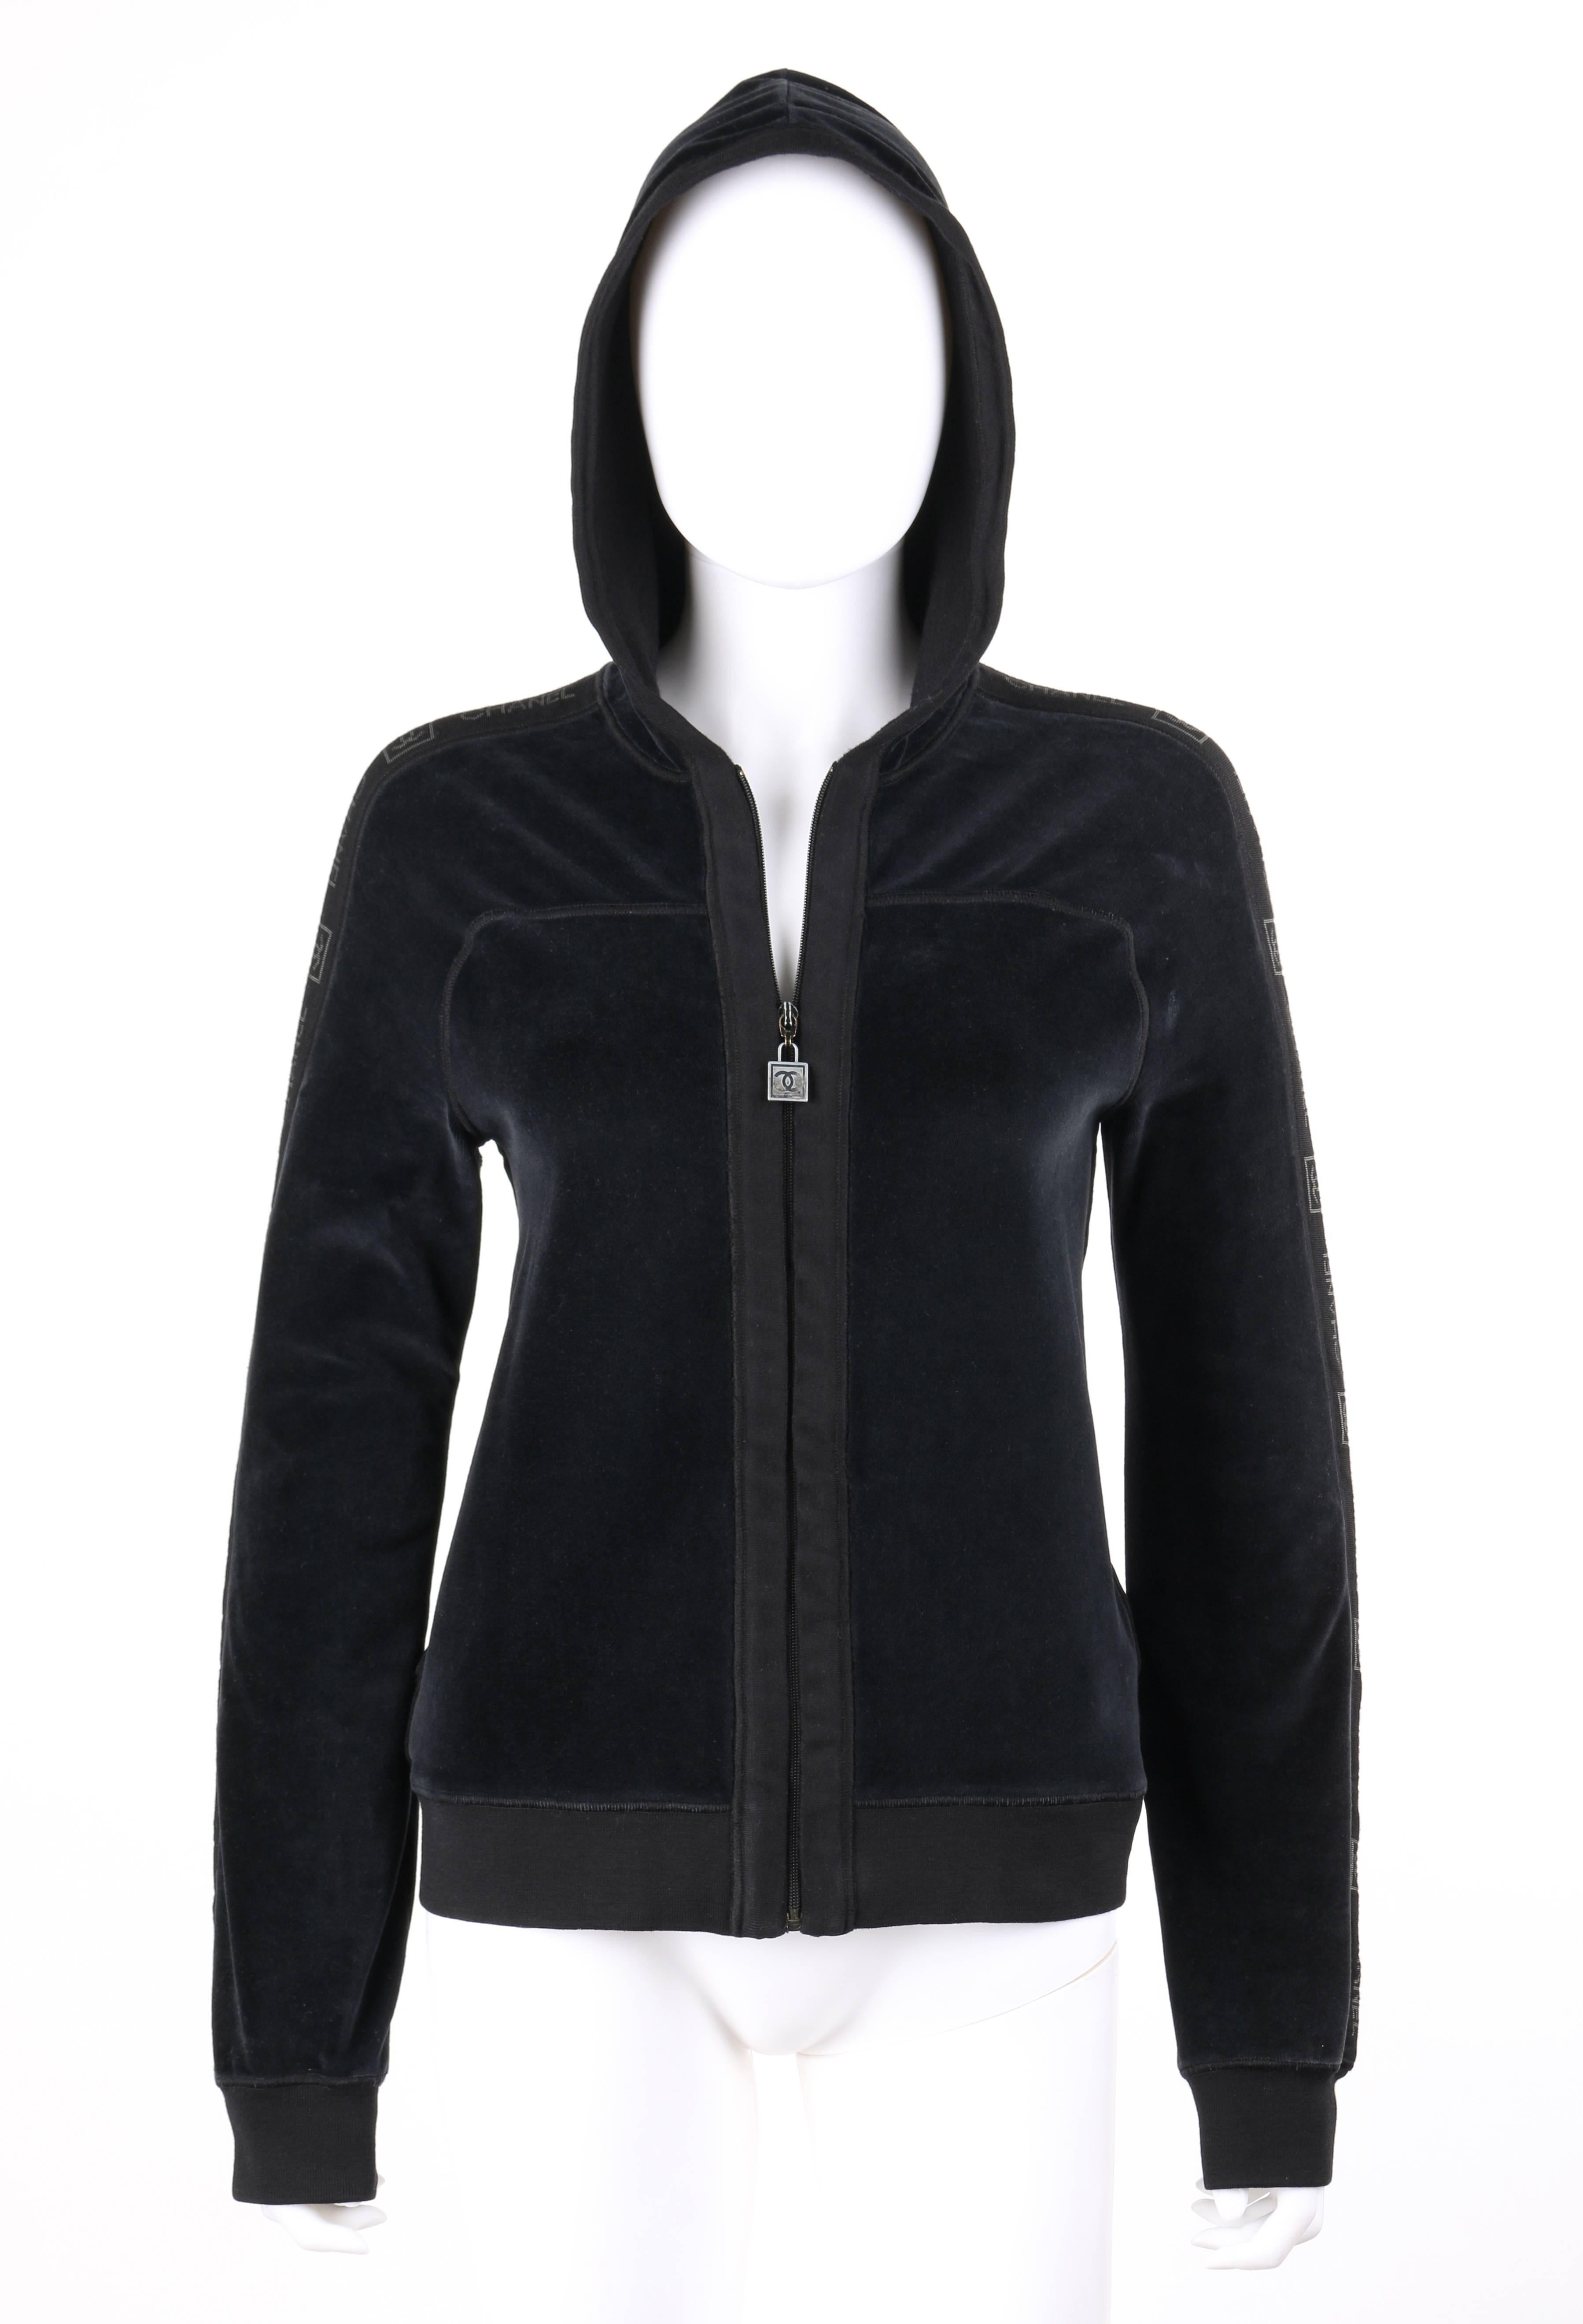 Chanel Autumn / Winter 2005 black velour zip up signature hooded track jacket active wear. Designed by Karl Lagerfeld. Black cotton velour knit. Center front zipper closure with gun metal square 